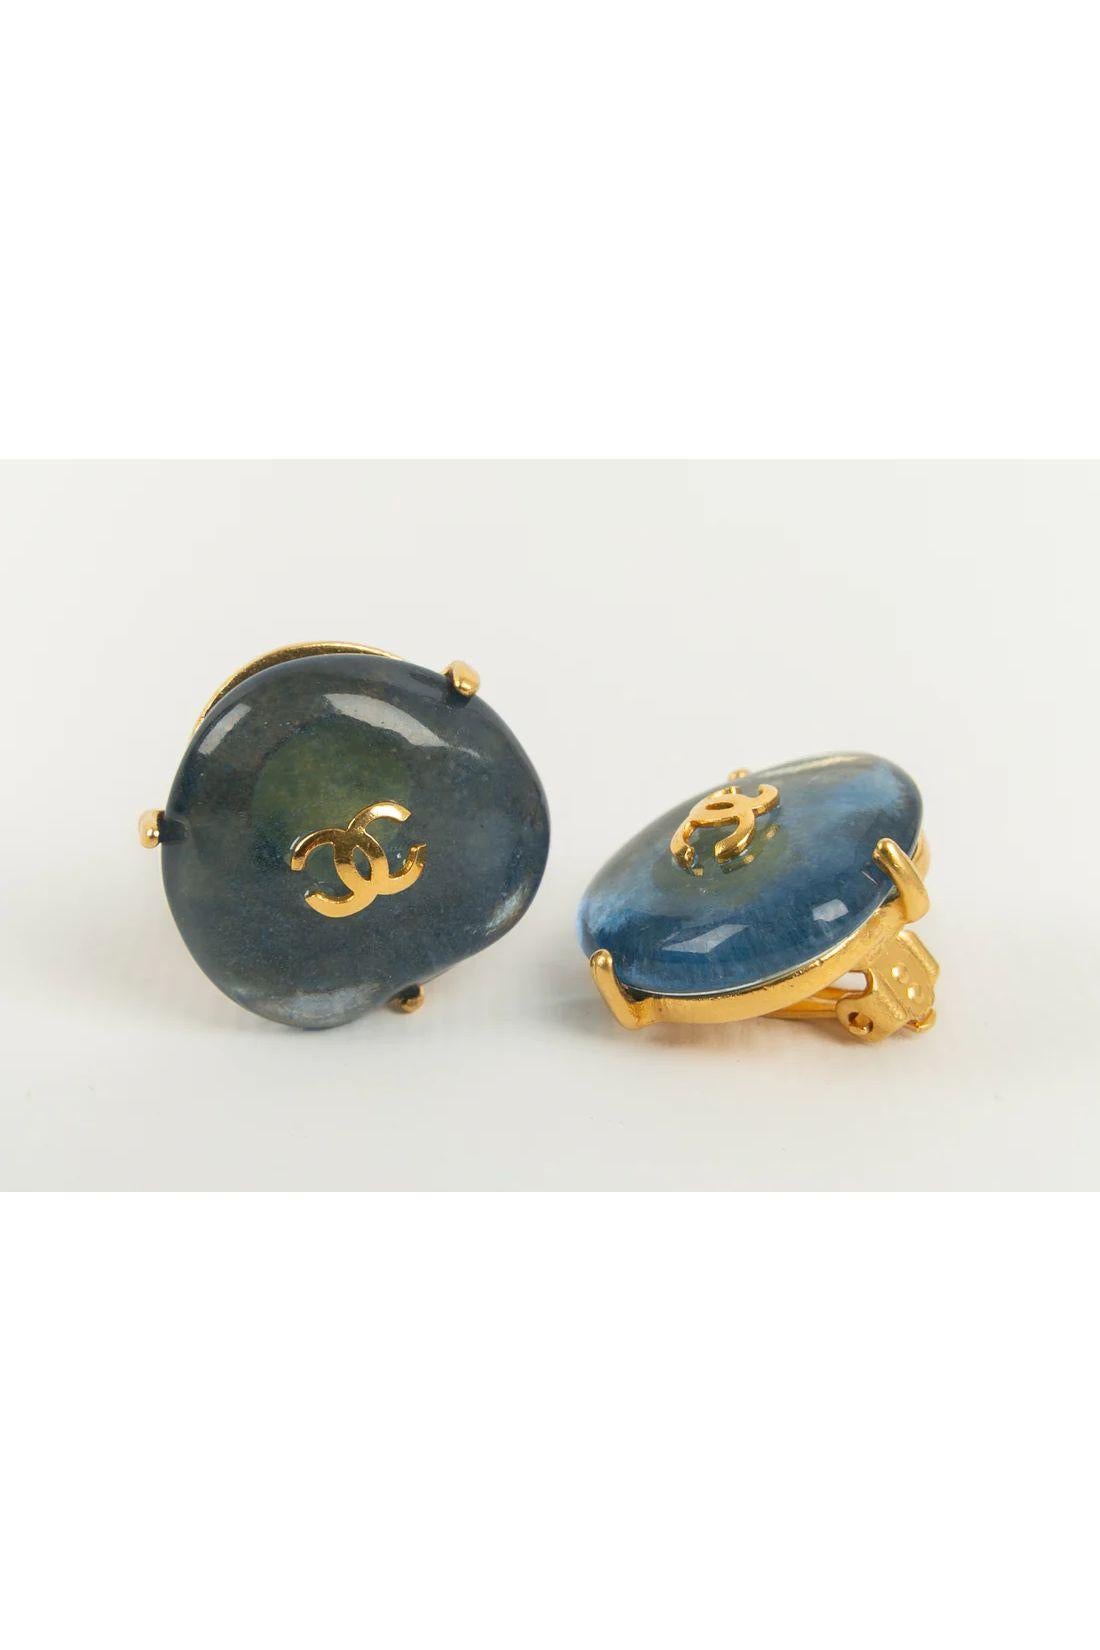 Chanel - (Made in France) Earrings clips in gilded metal and cabochons in blue glass paste. 
Fall-Winter 1997 collection.

Additional information:
Dimensions: Ø 2 cm

Condition: 
Very good condition

Seller Ref number: BOB17